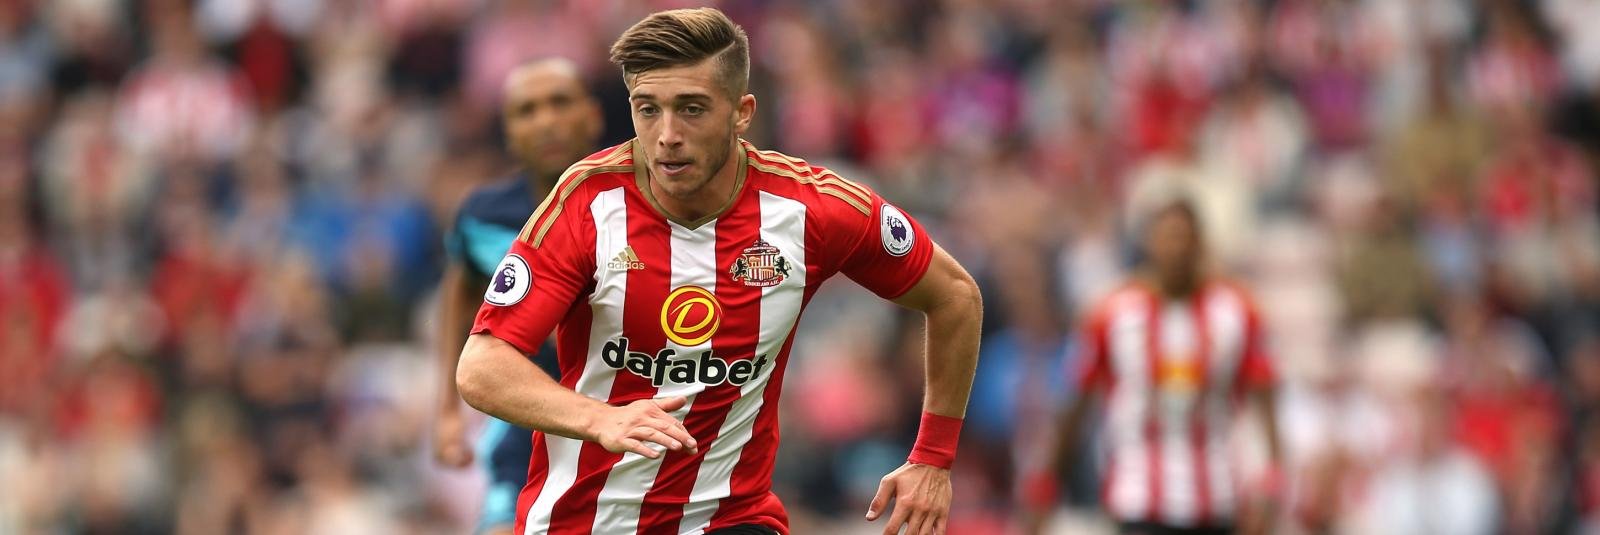 Are Sunderland’s youngsters good enough for the Premier League?